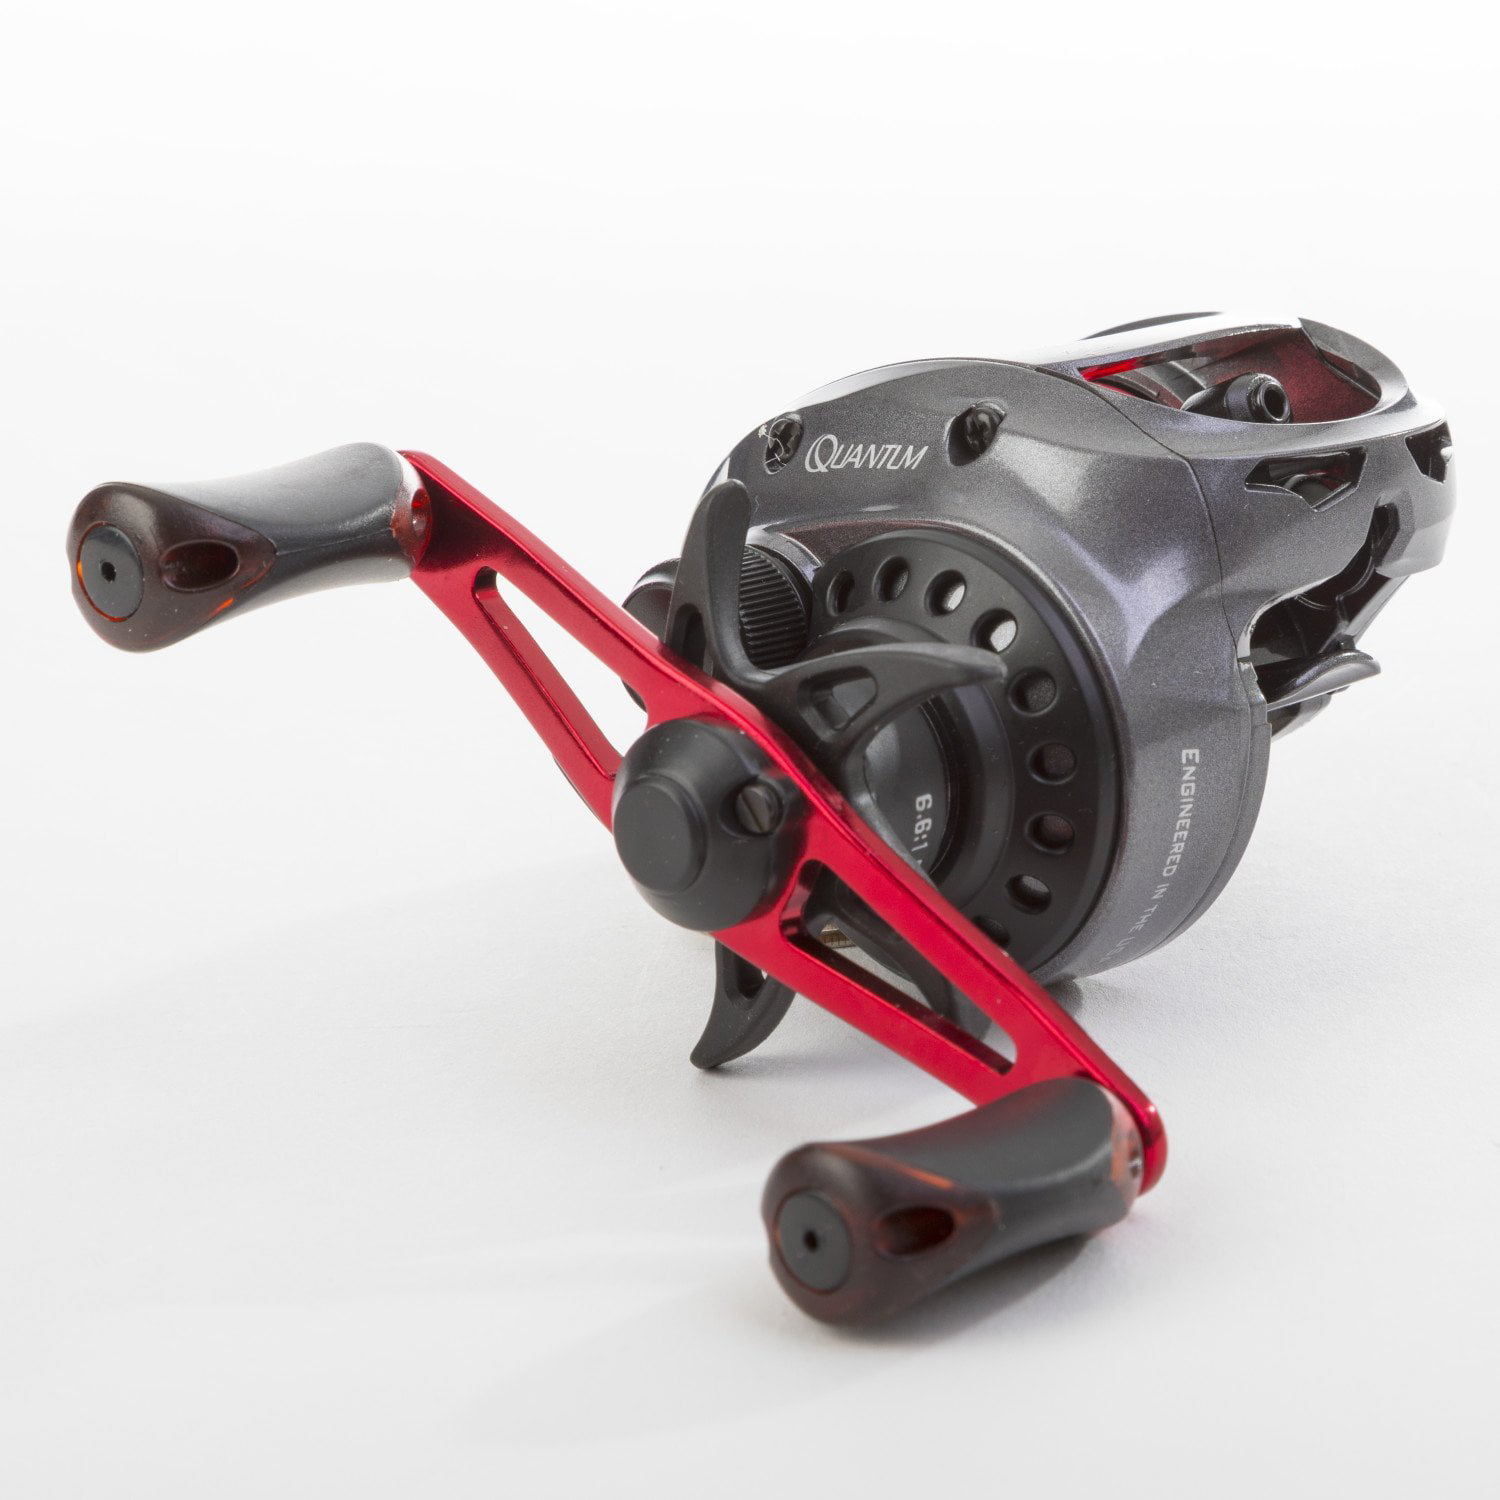 REVIEW: Quantum EXO Baitcast reels reviewed by FishingGearTester